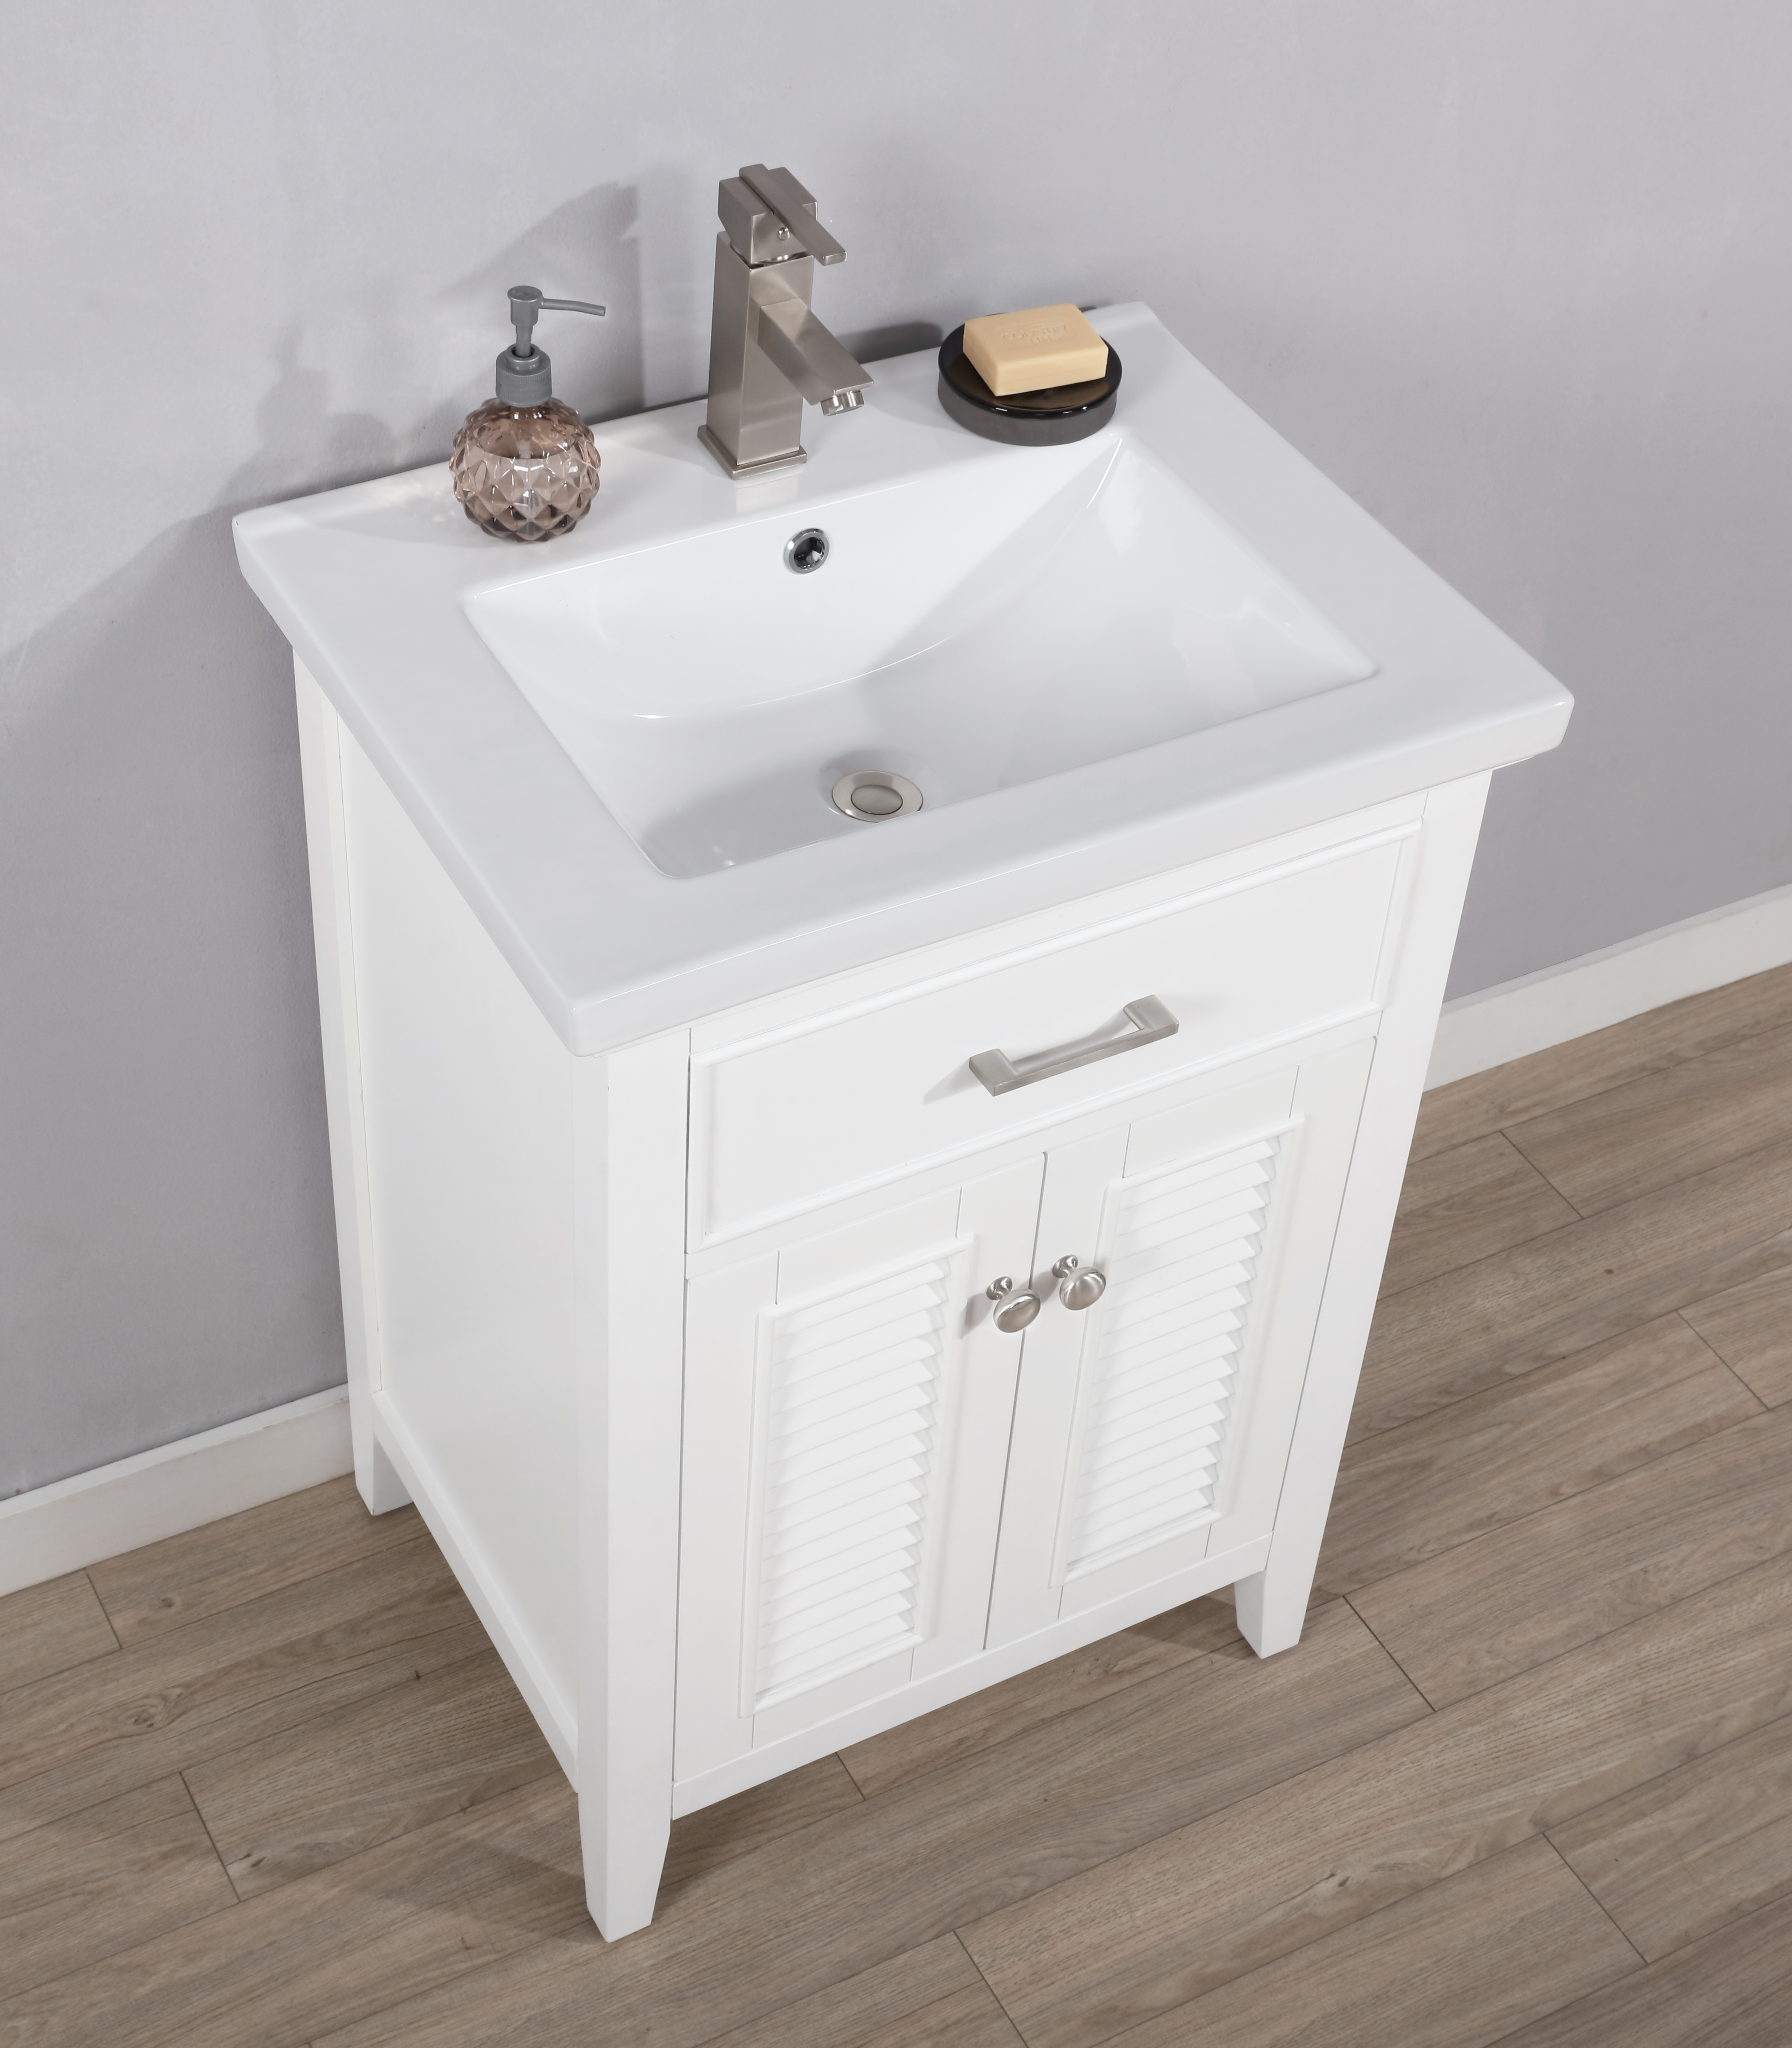 Transitional 24" Single Sink Bathroom Vanity with Porcelain Integrated